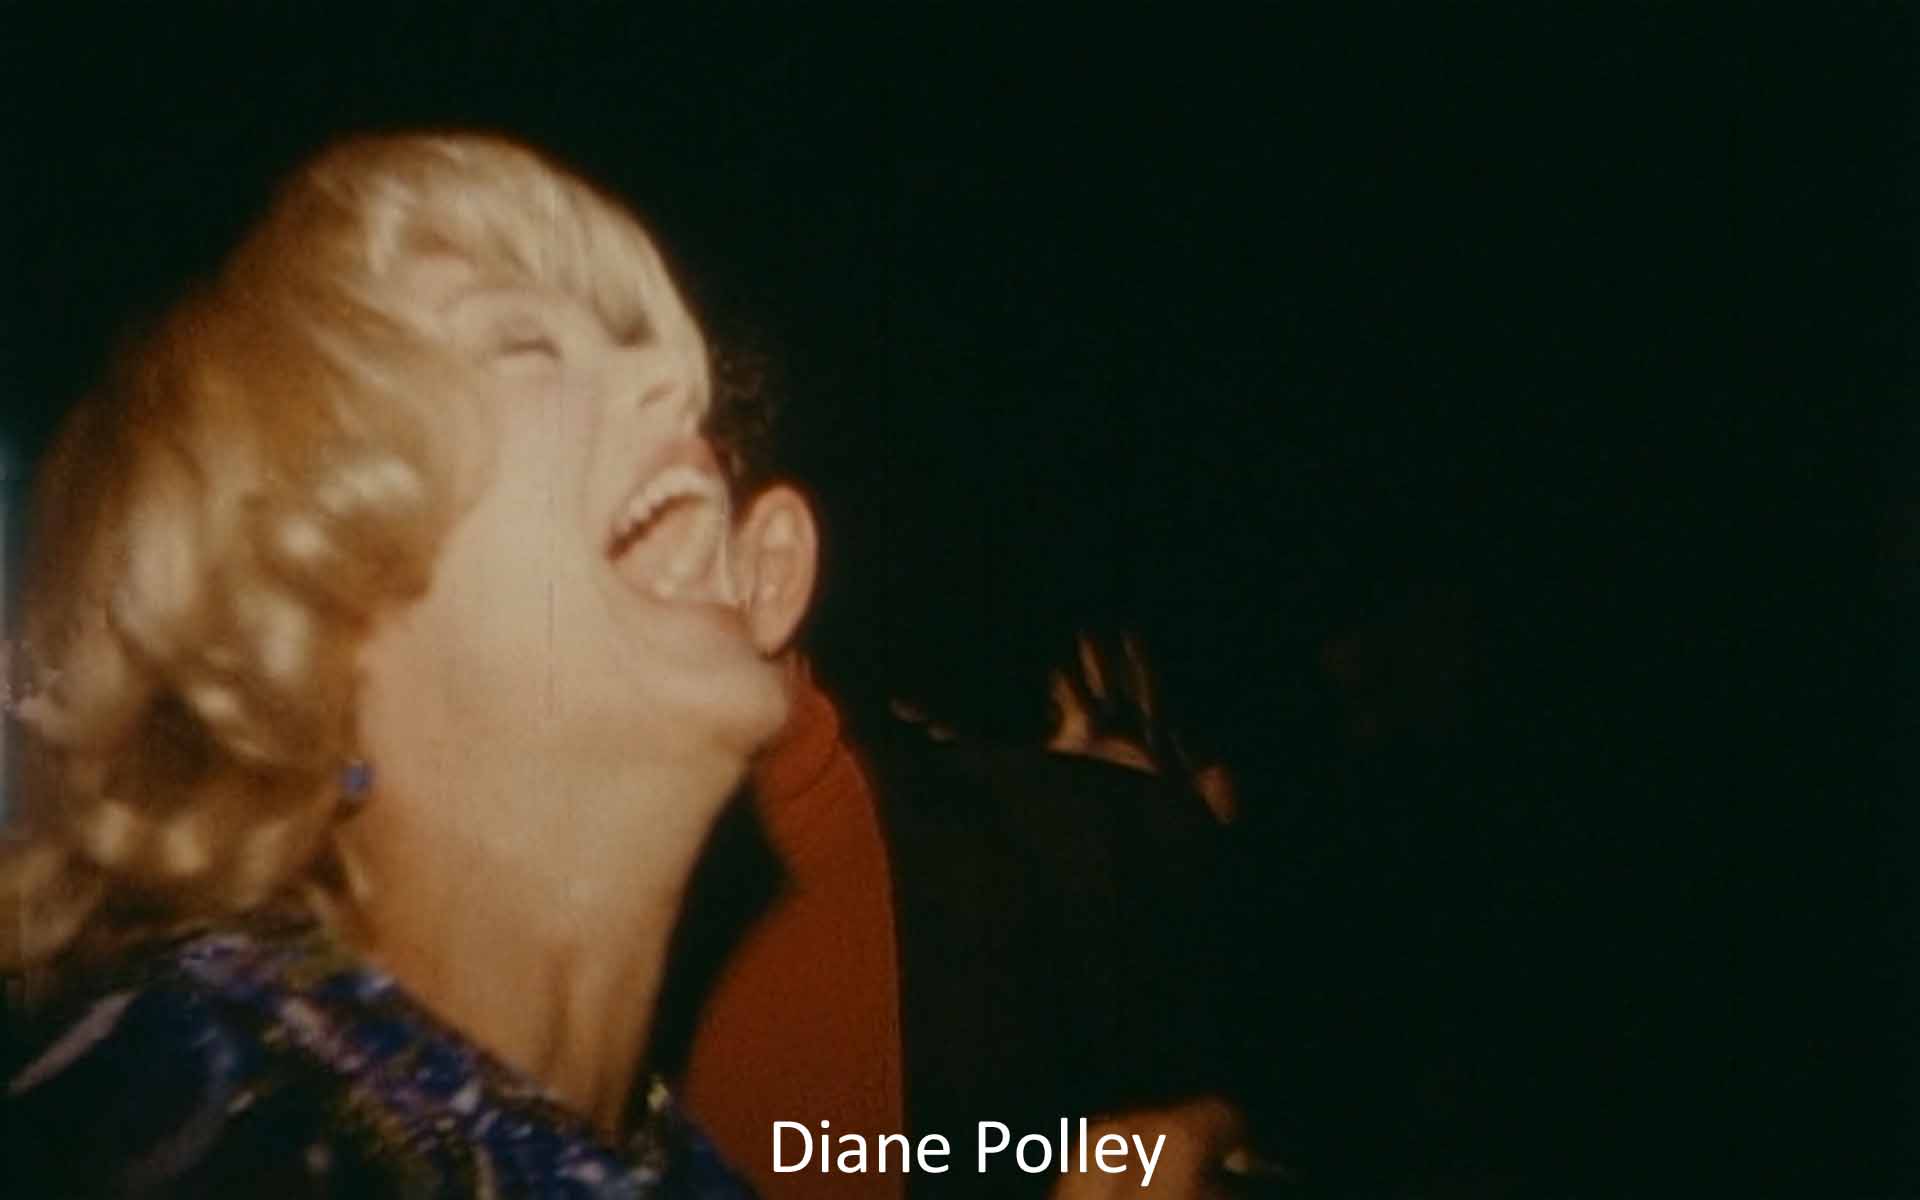 Diane Polley